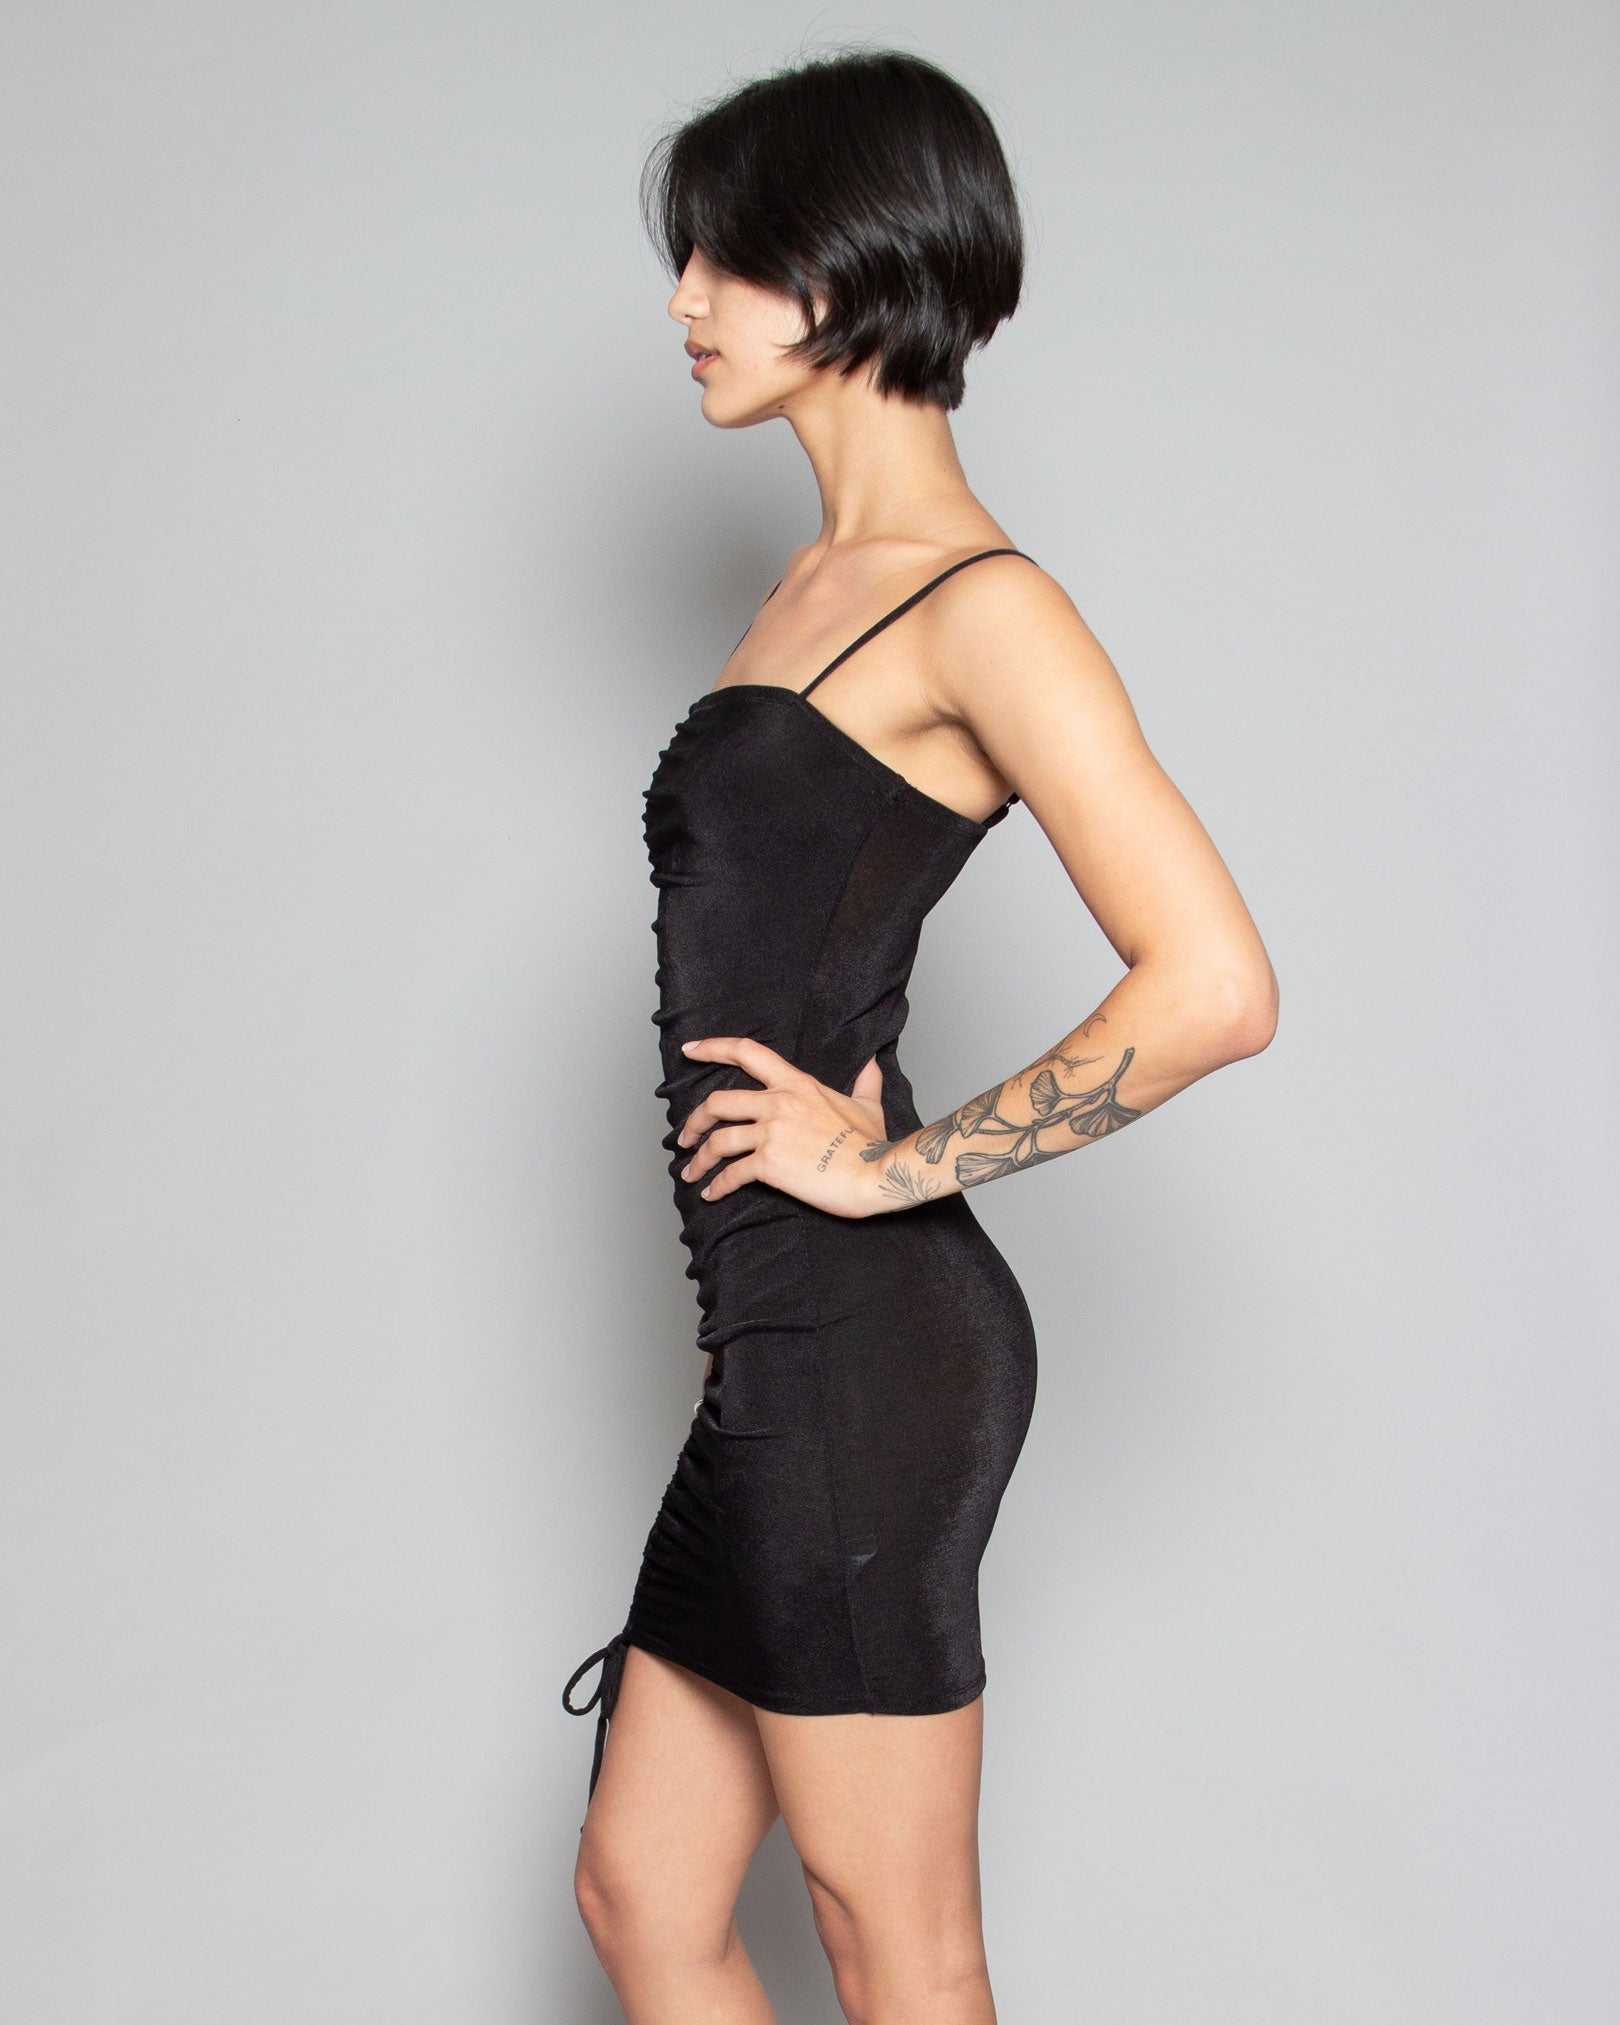 PERSONS India Rouched Slinky Mini Dress in Ink available at Lahn.shop